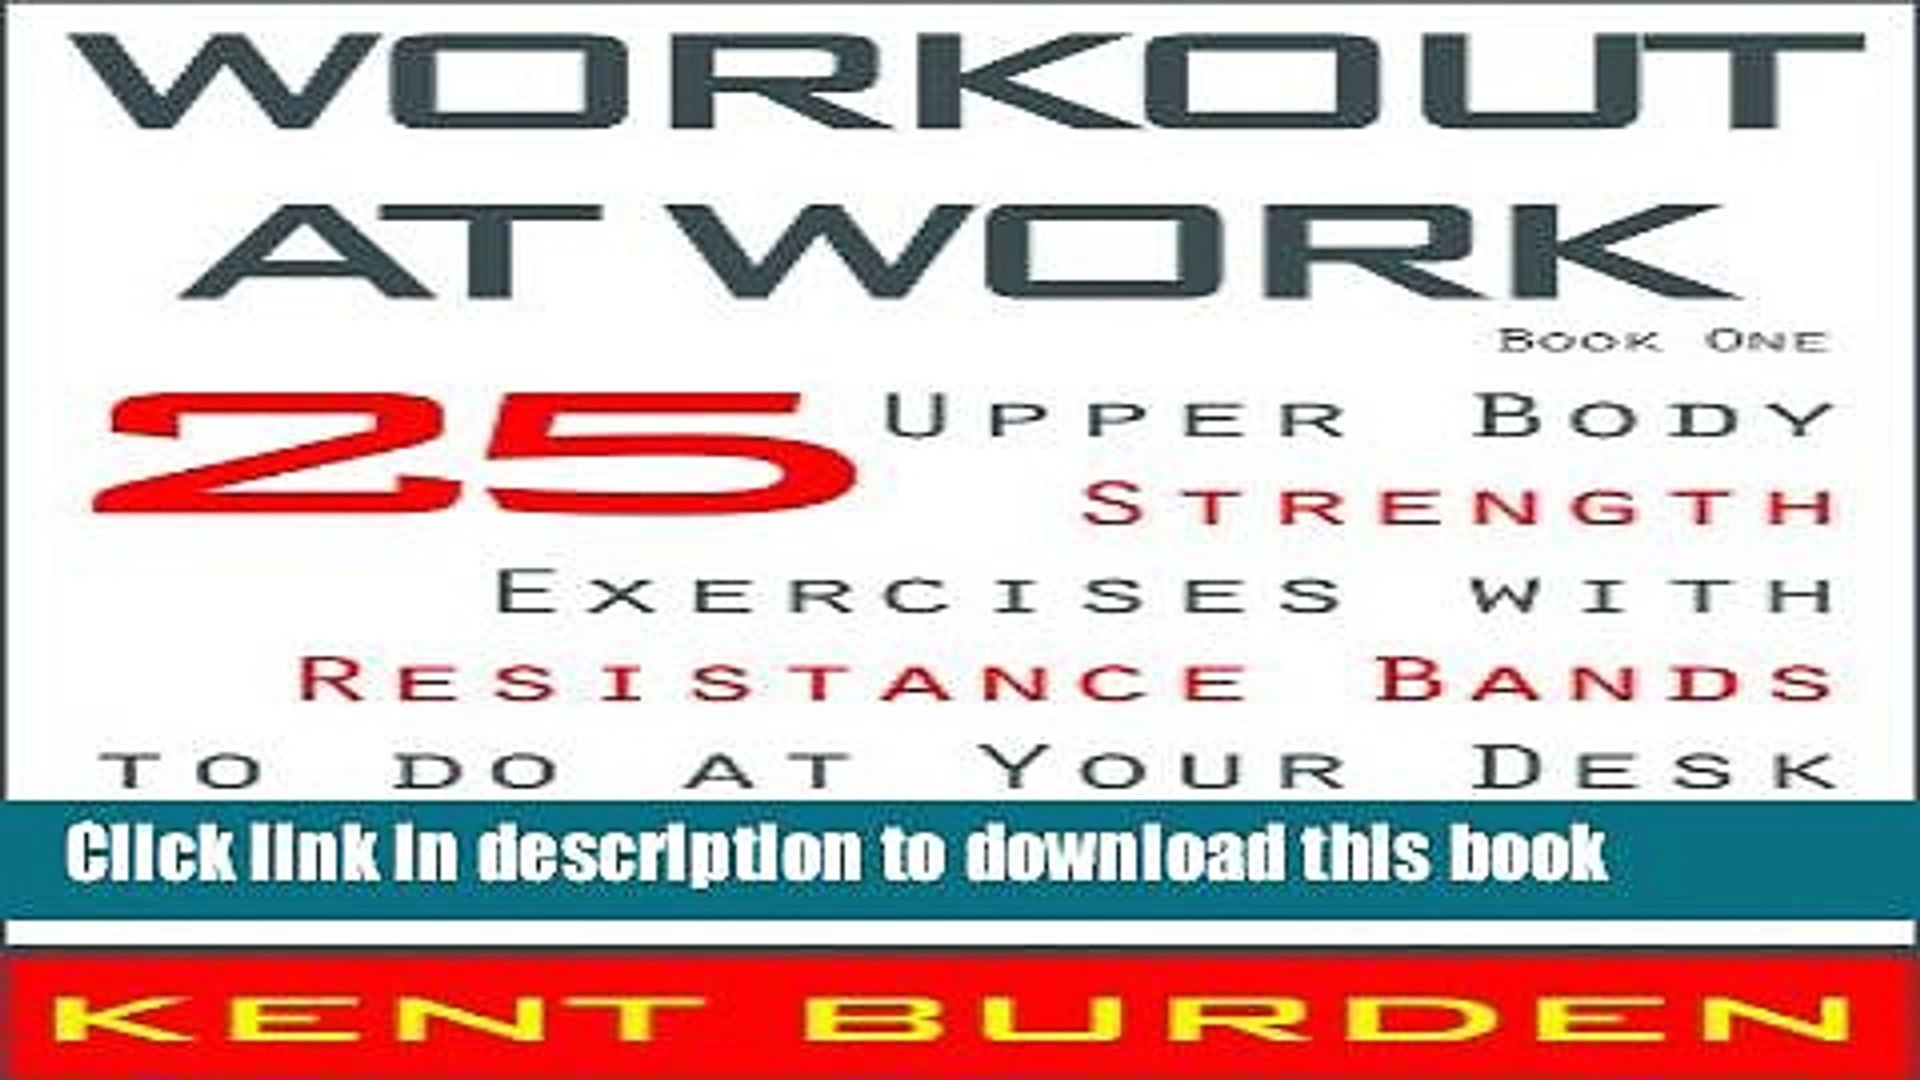 Read Workout At Work 25 Upper Body Strength Exercises With